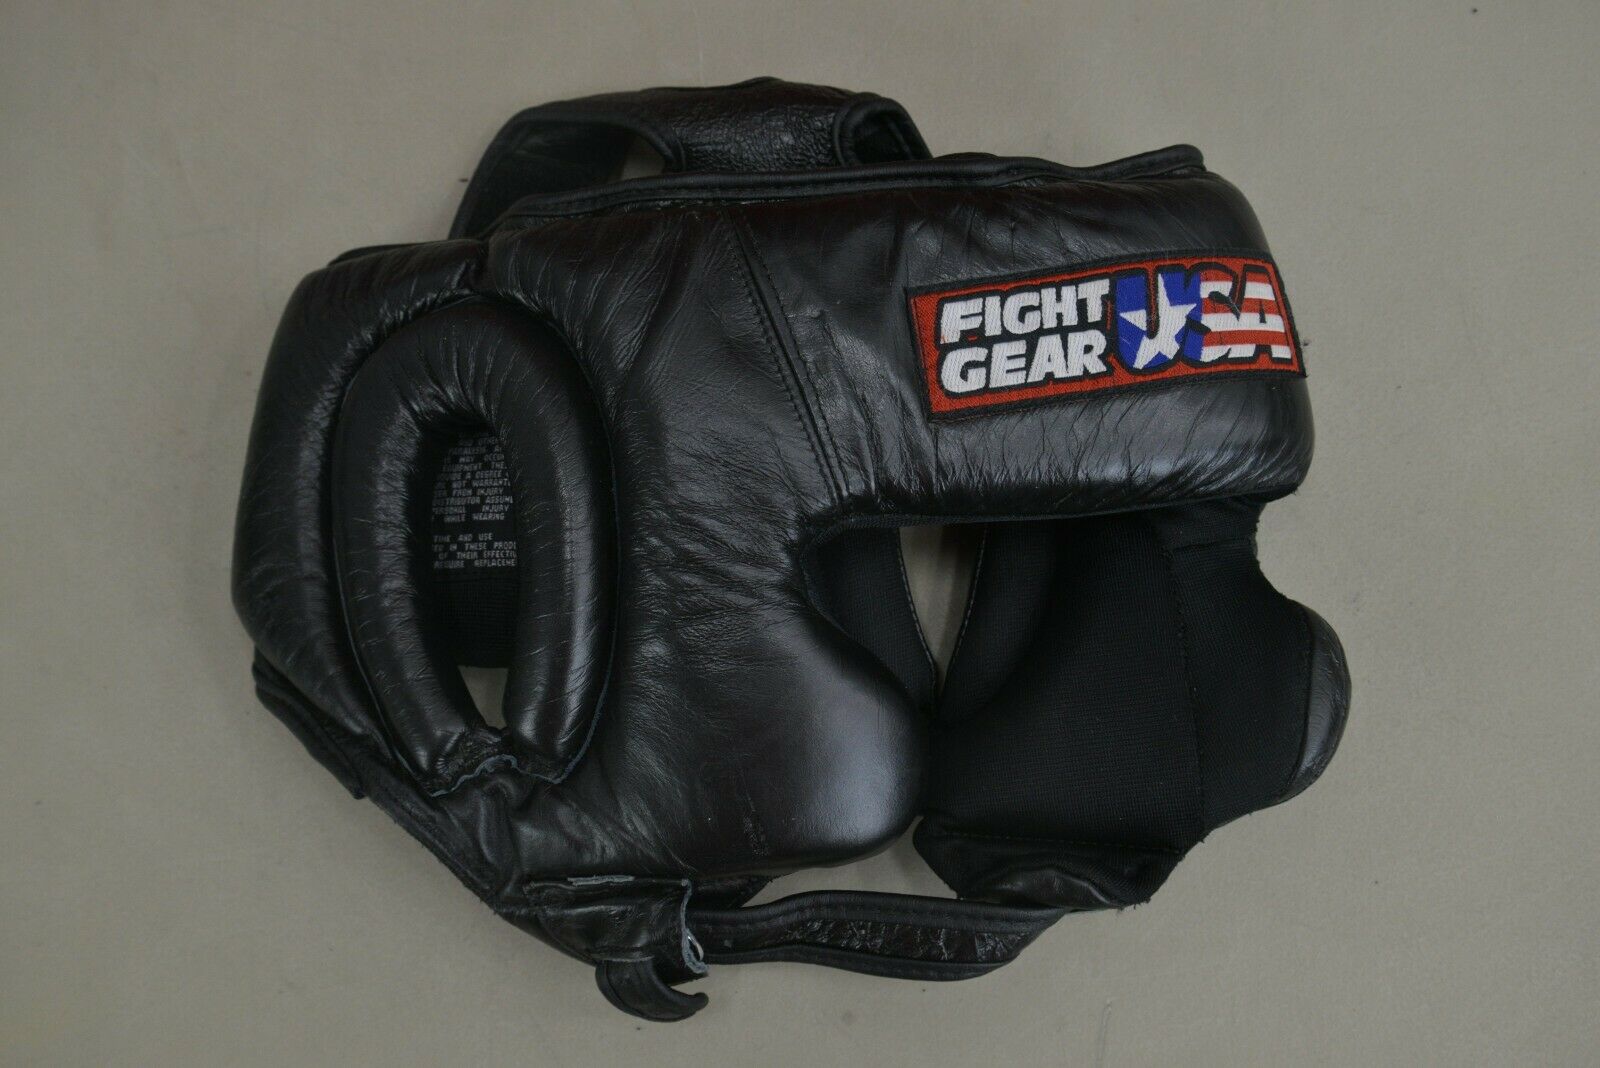 24152 WH2 Details about   Ringside Boxing Training Gear Martial Arts MMA Fight Gear 